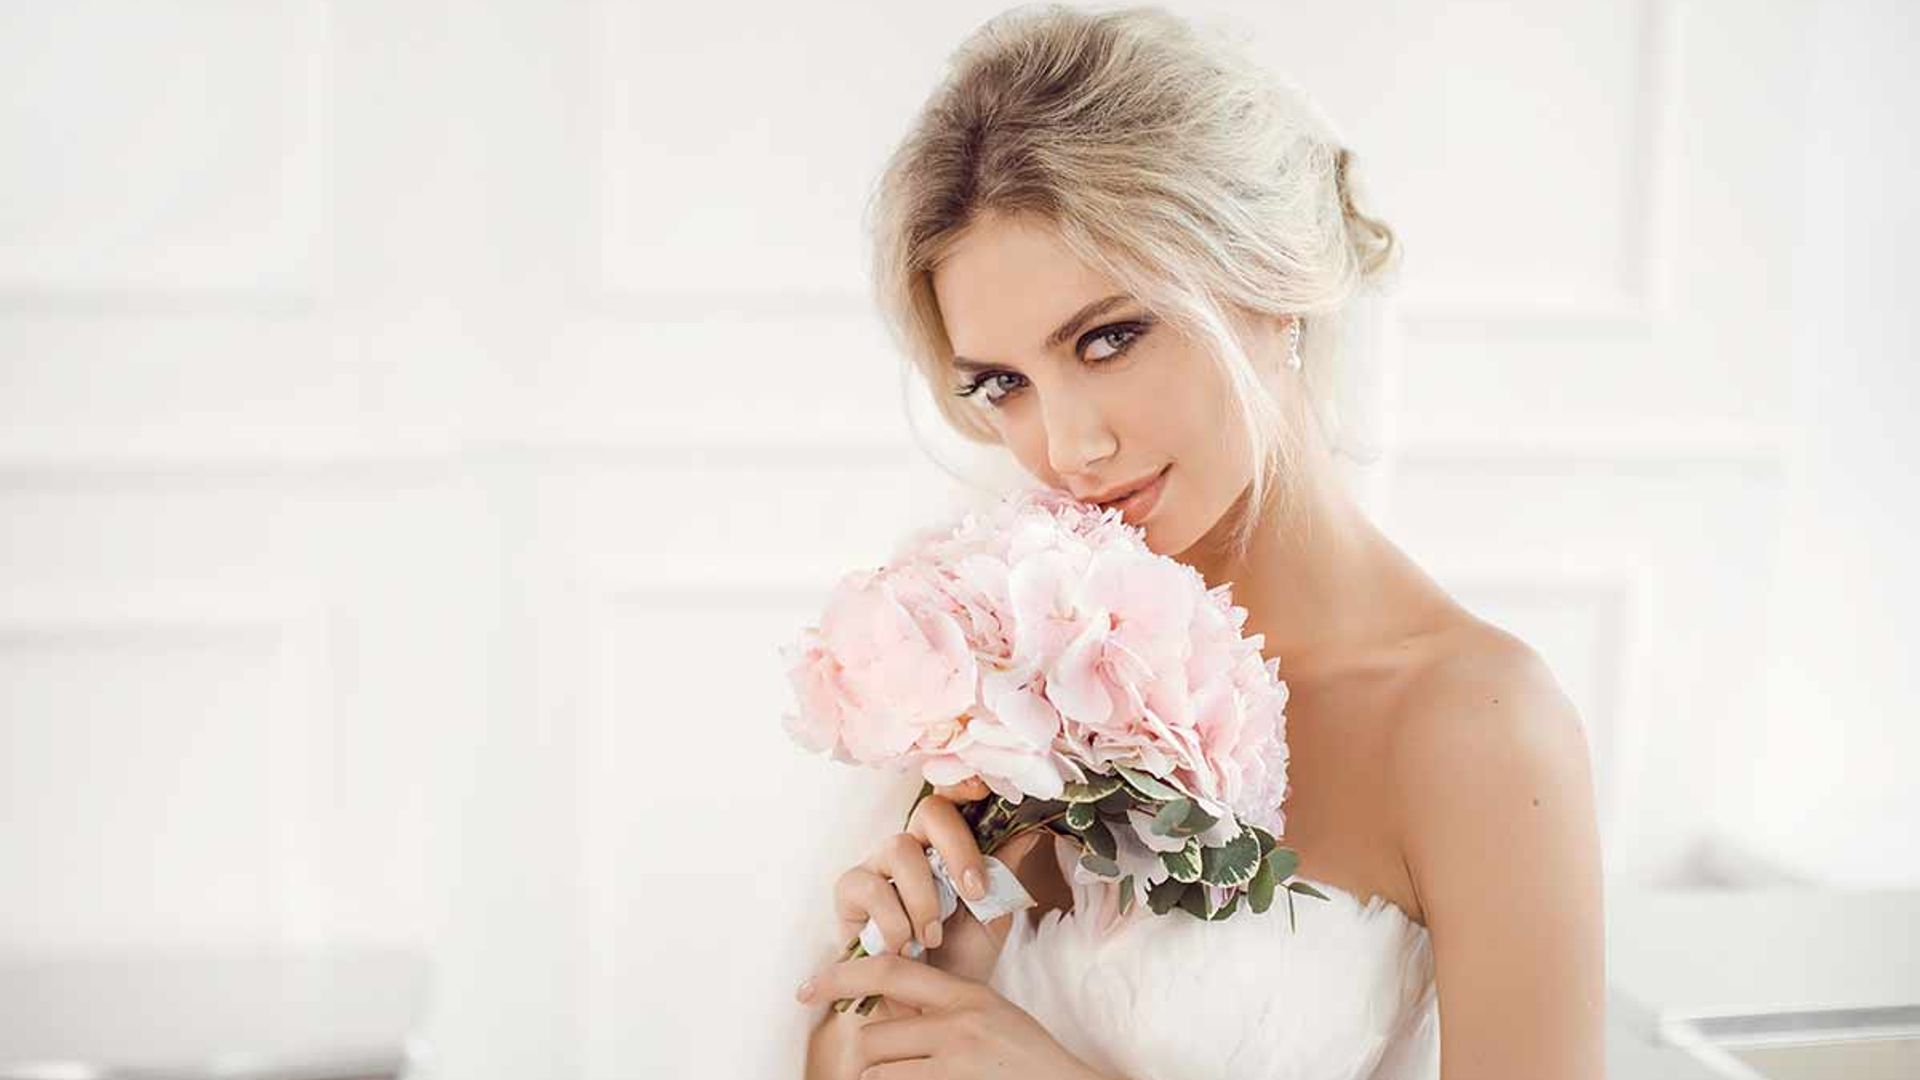 How To Prepare Your Wedding Day Hair 6 Expert Tips You Need To